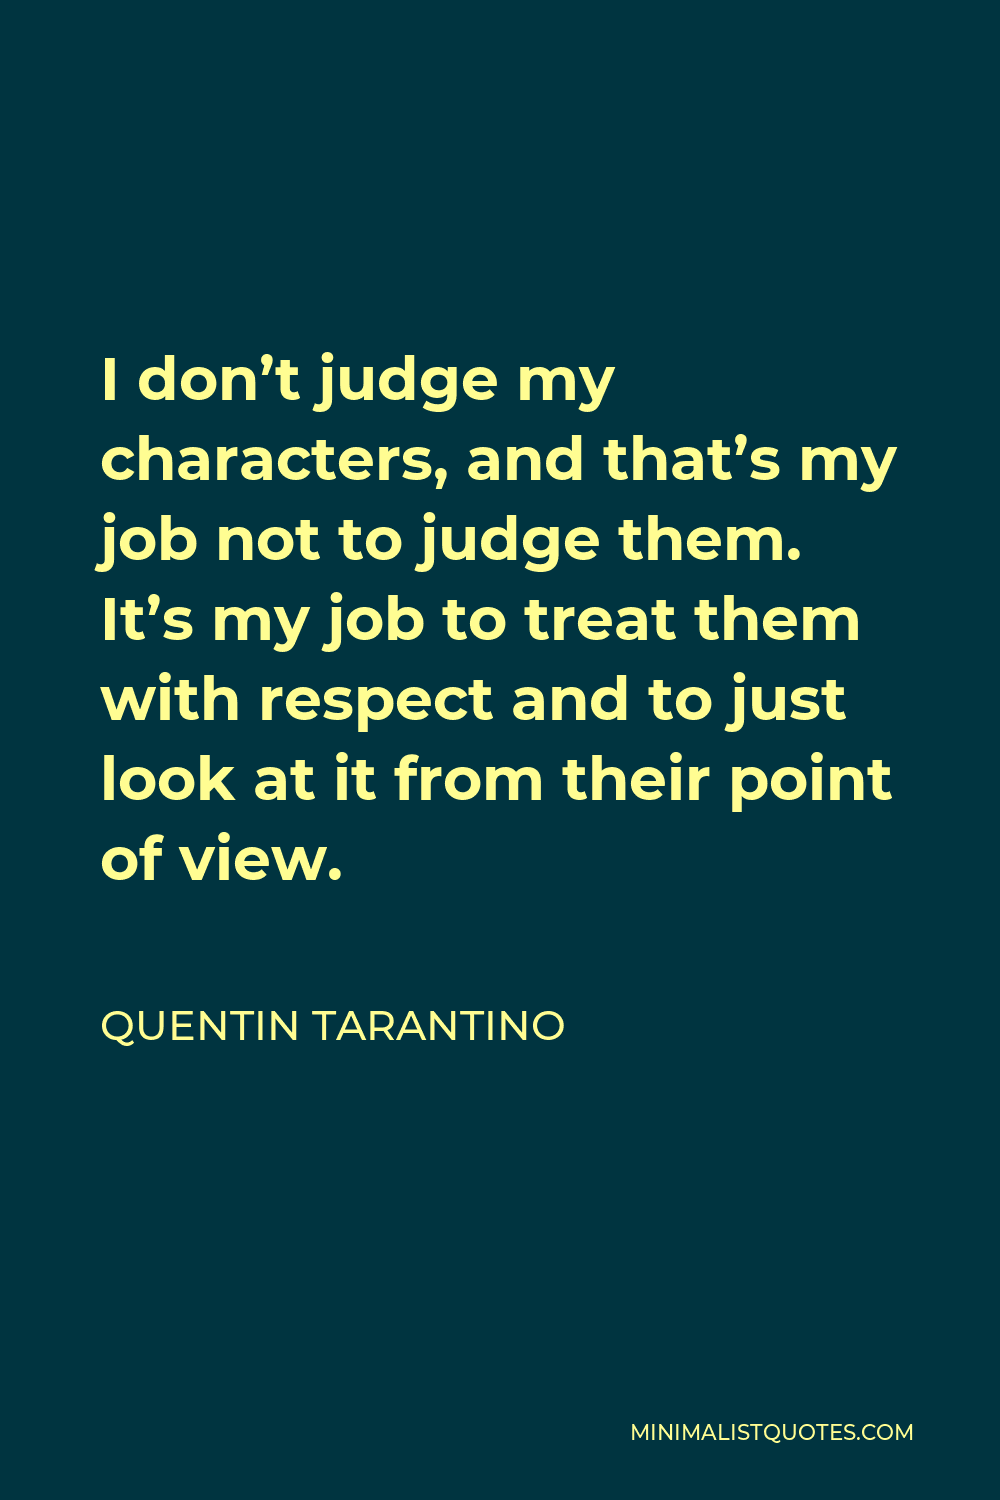 Quentin Tarantino Quote - I don’t judge my characters, and that’s my job not to judge them. It’s my job to treat them with respect and to just look at it from their point of view.